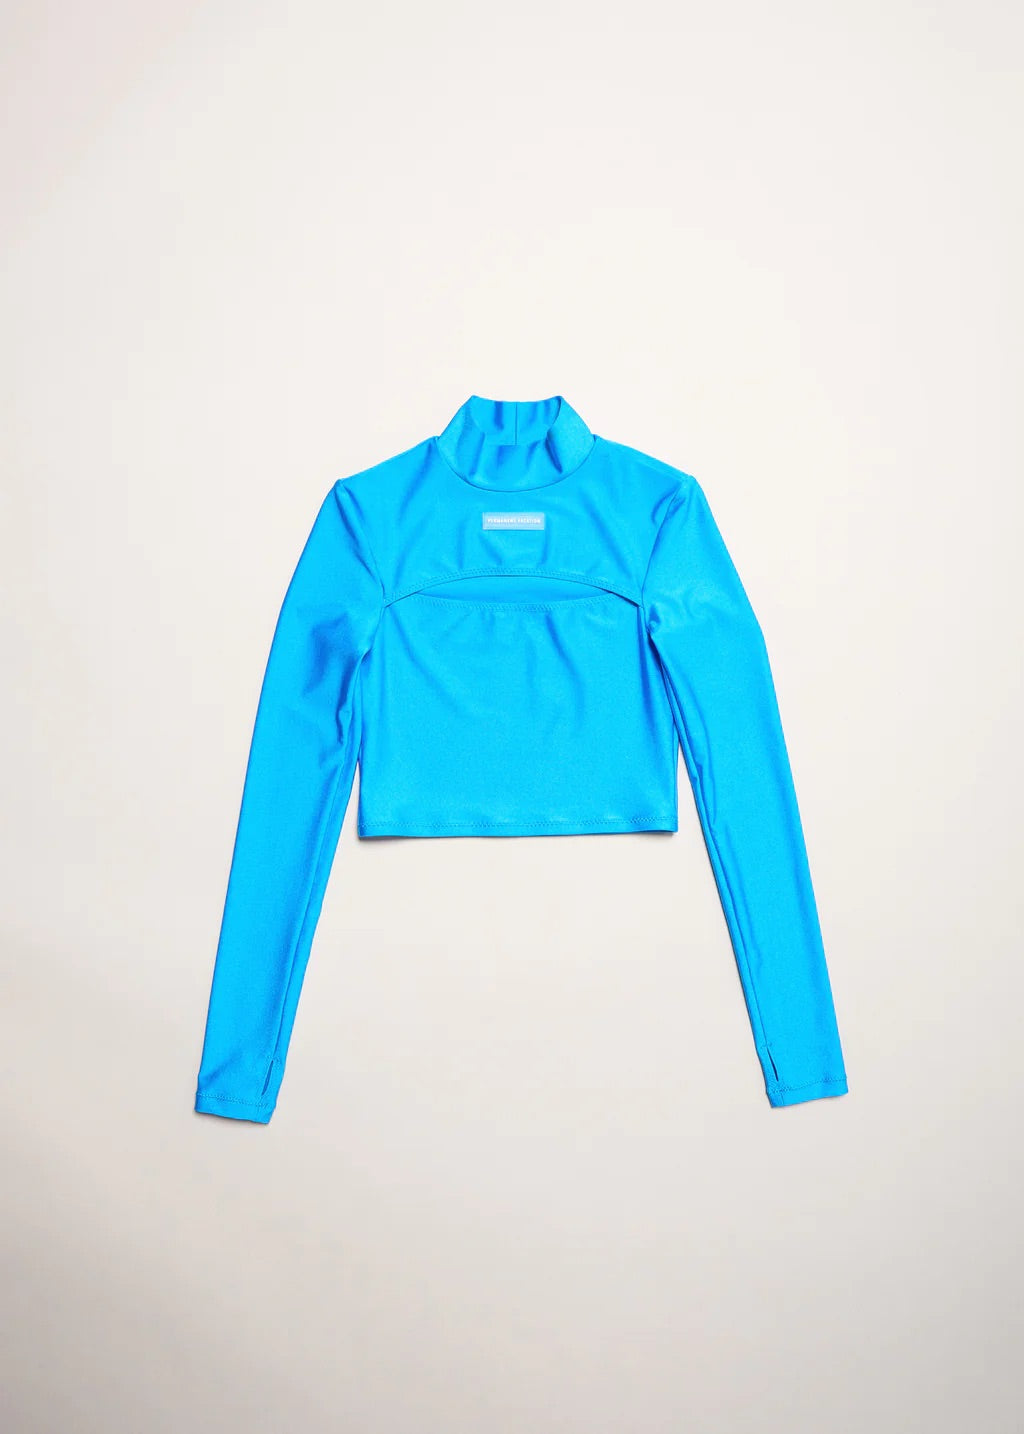 PV Immerse Top // Ultra Blue